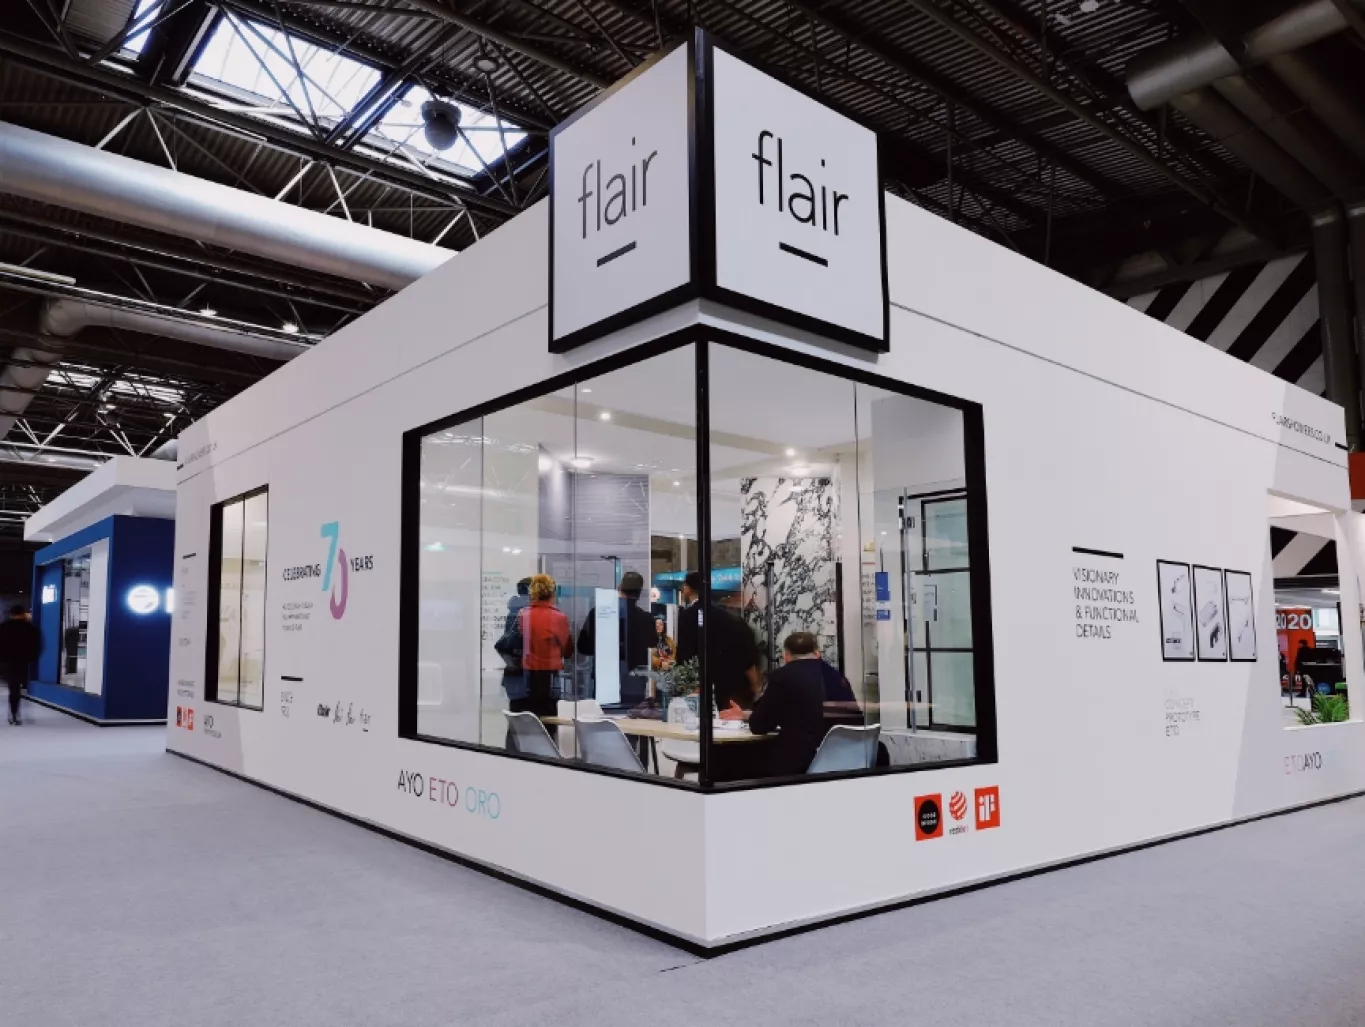 The Flair Stand from the 2022 Cersaie Trade Show in Bologna, Italy.